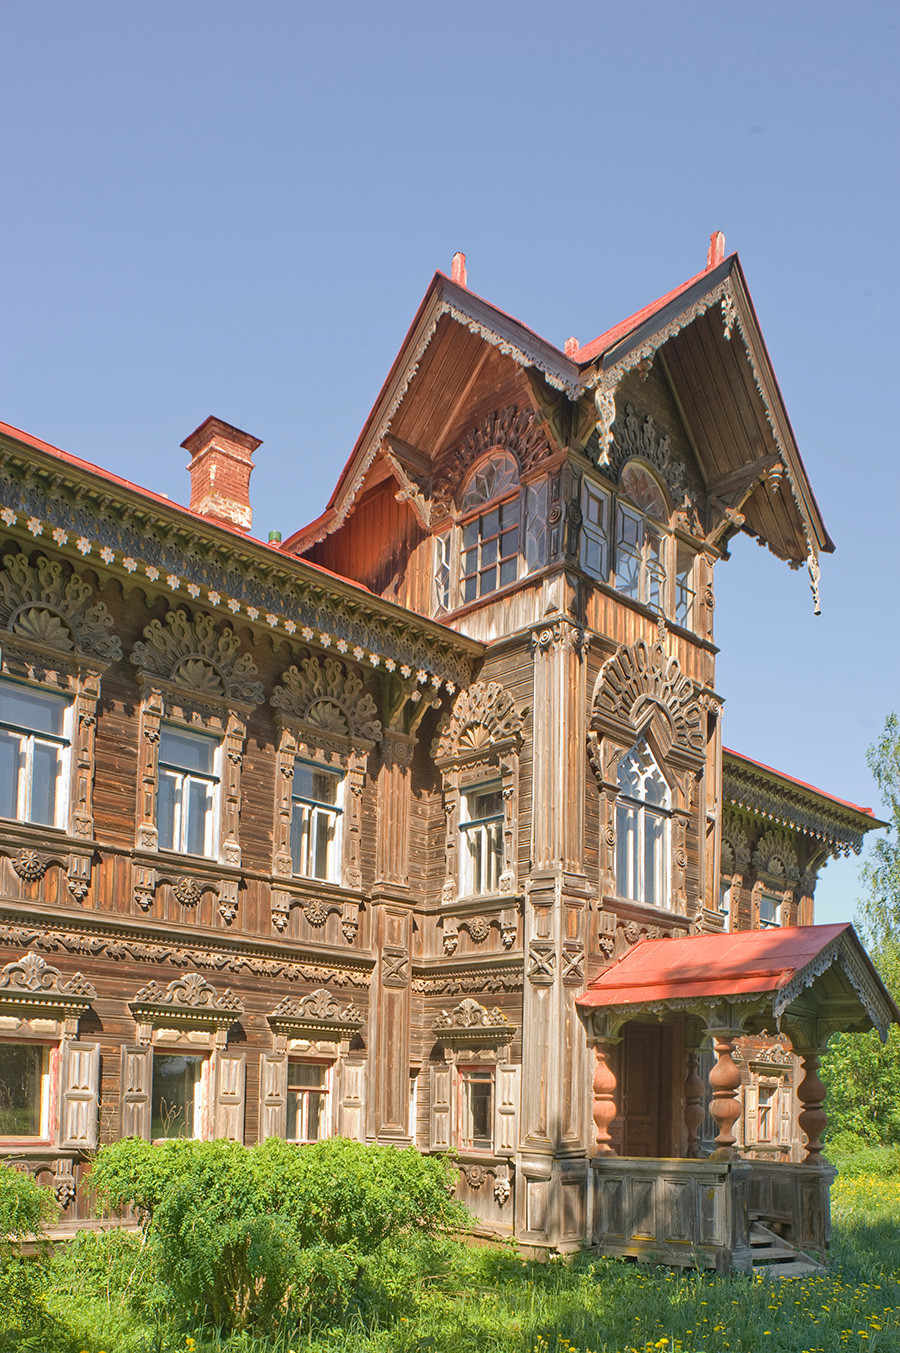 Poliashov house. Central tower with main entrance, southwest view. May 29, 2016